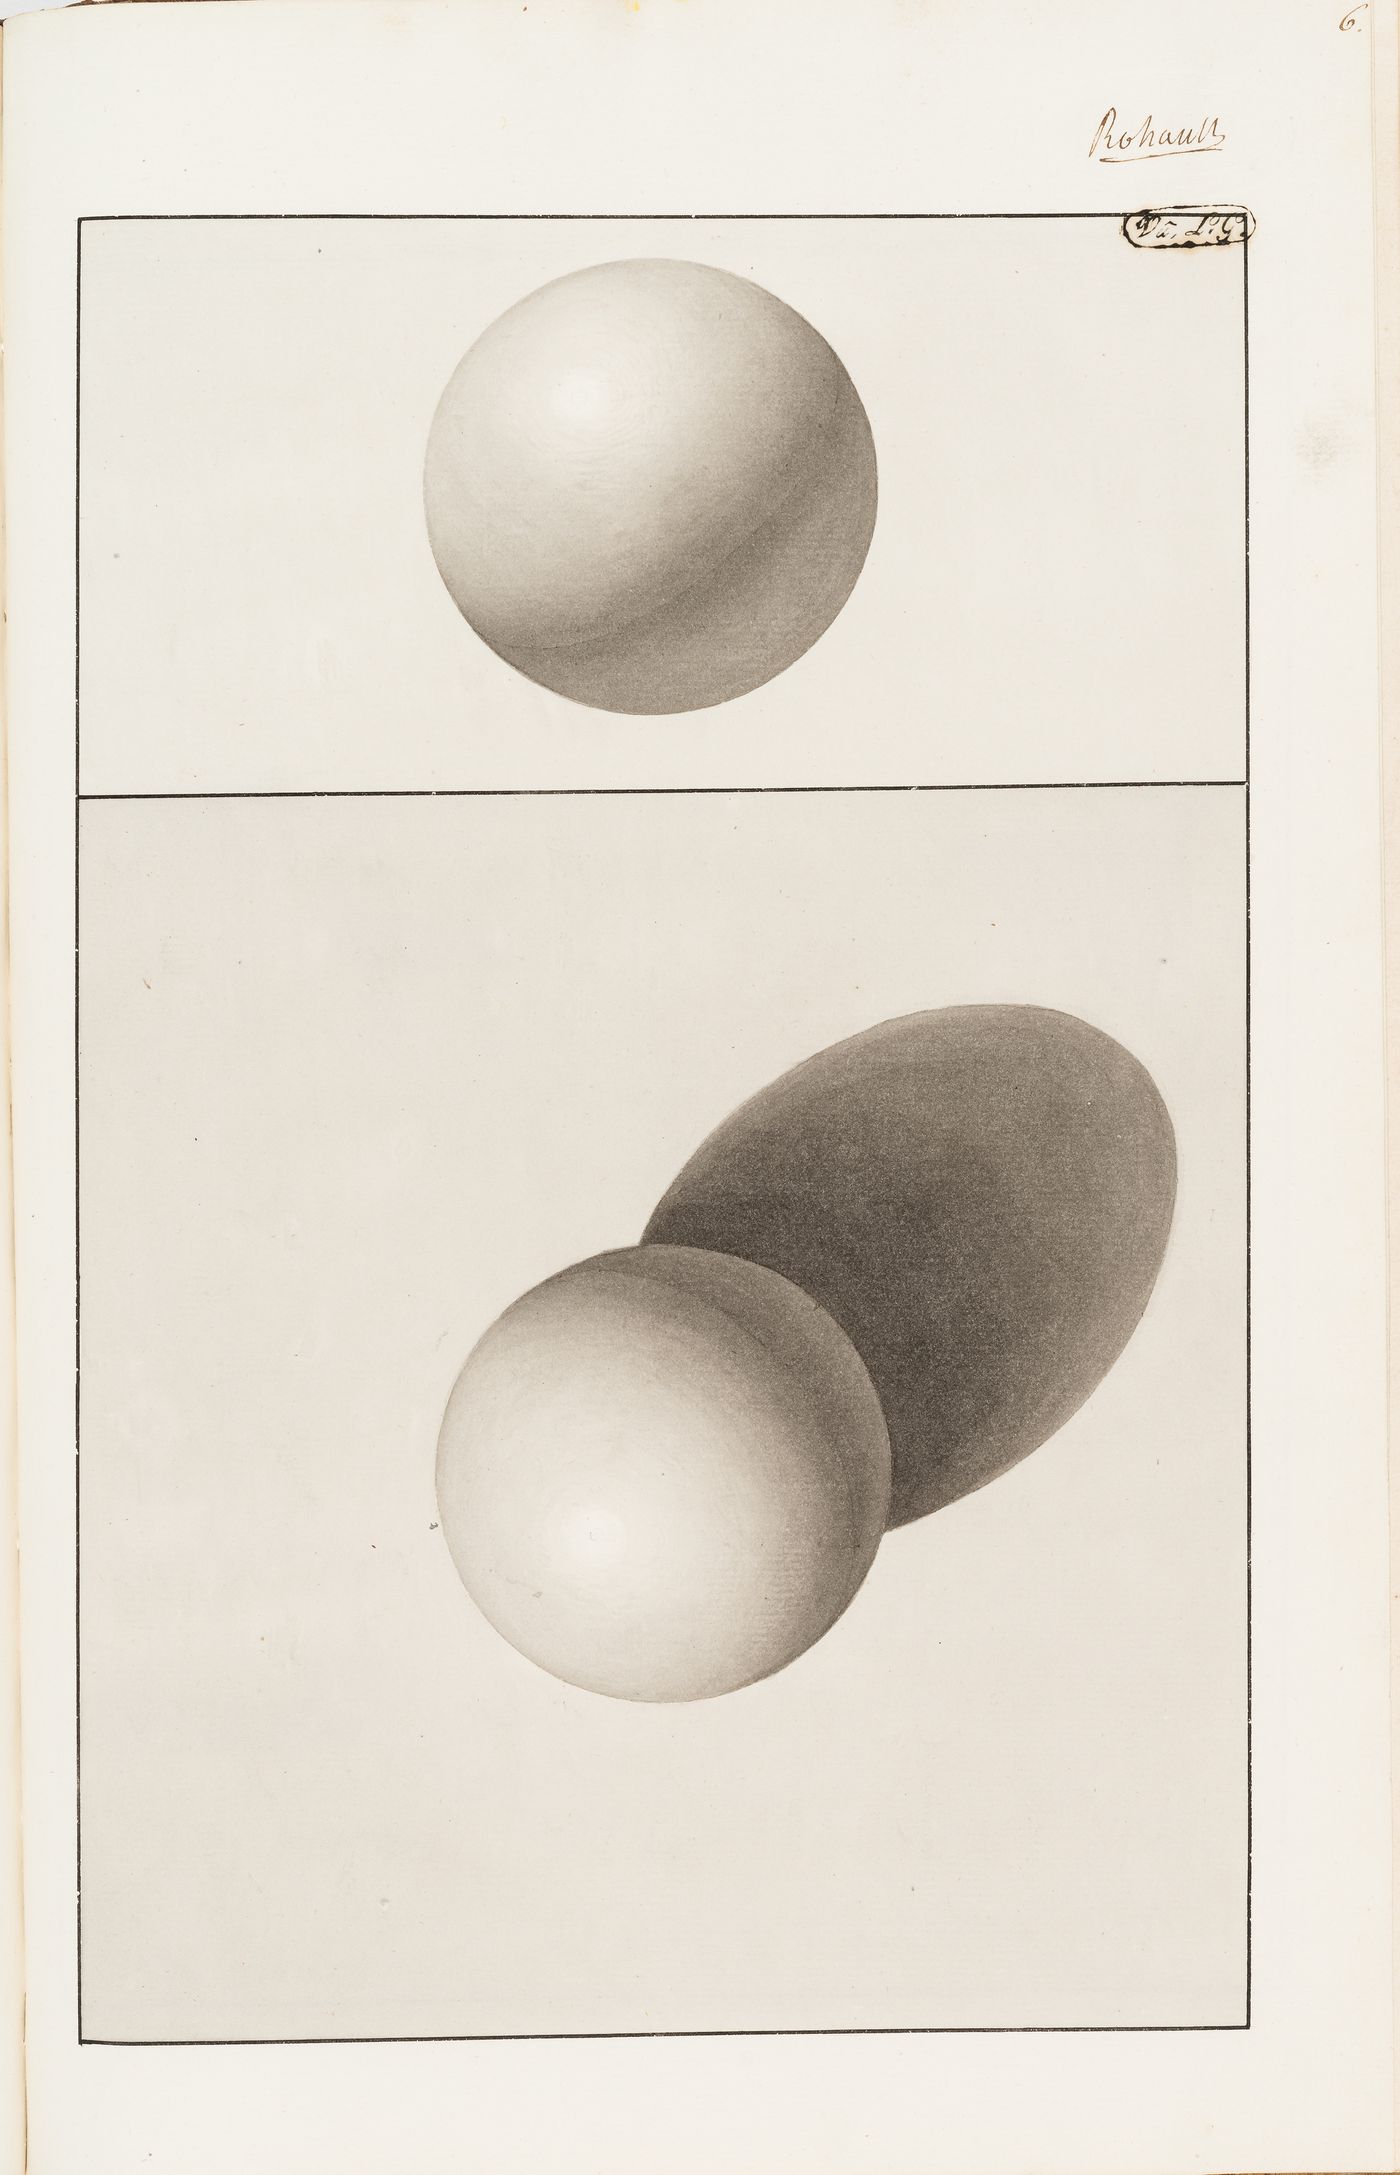 Pictorial drawings for two spheres, exercises in draughting shadows